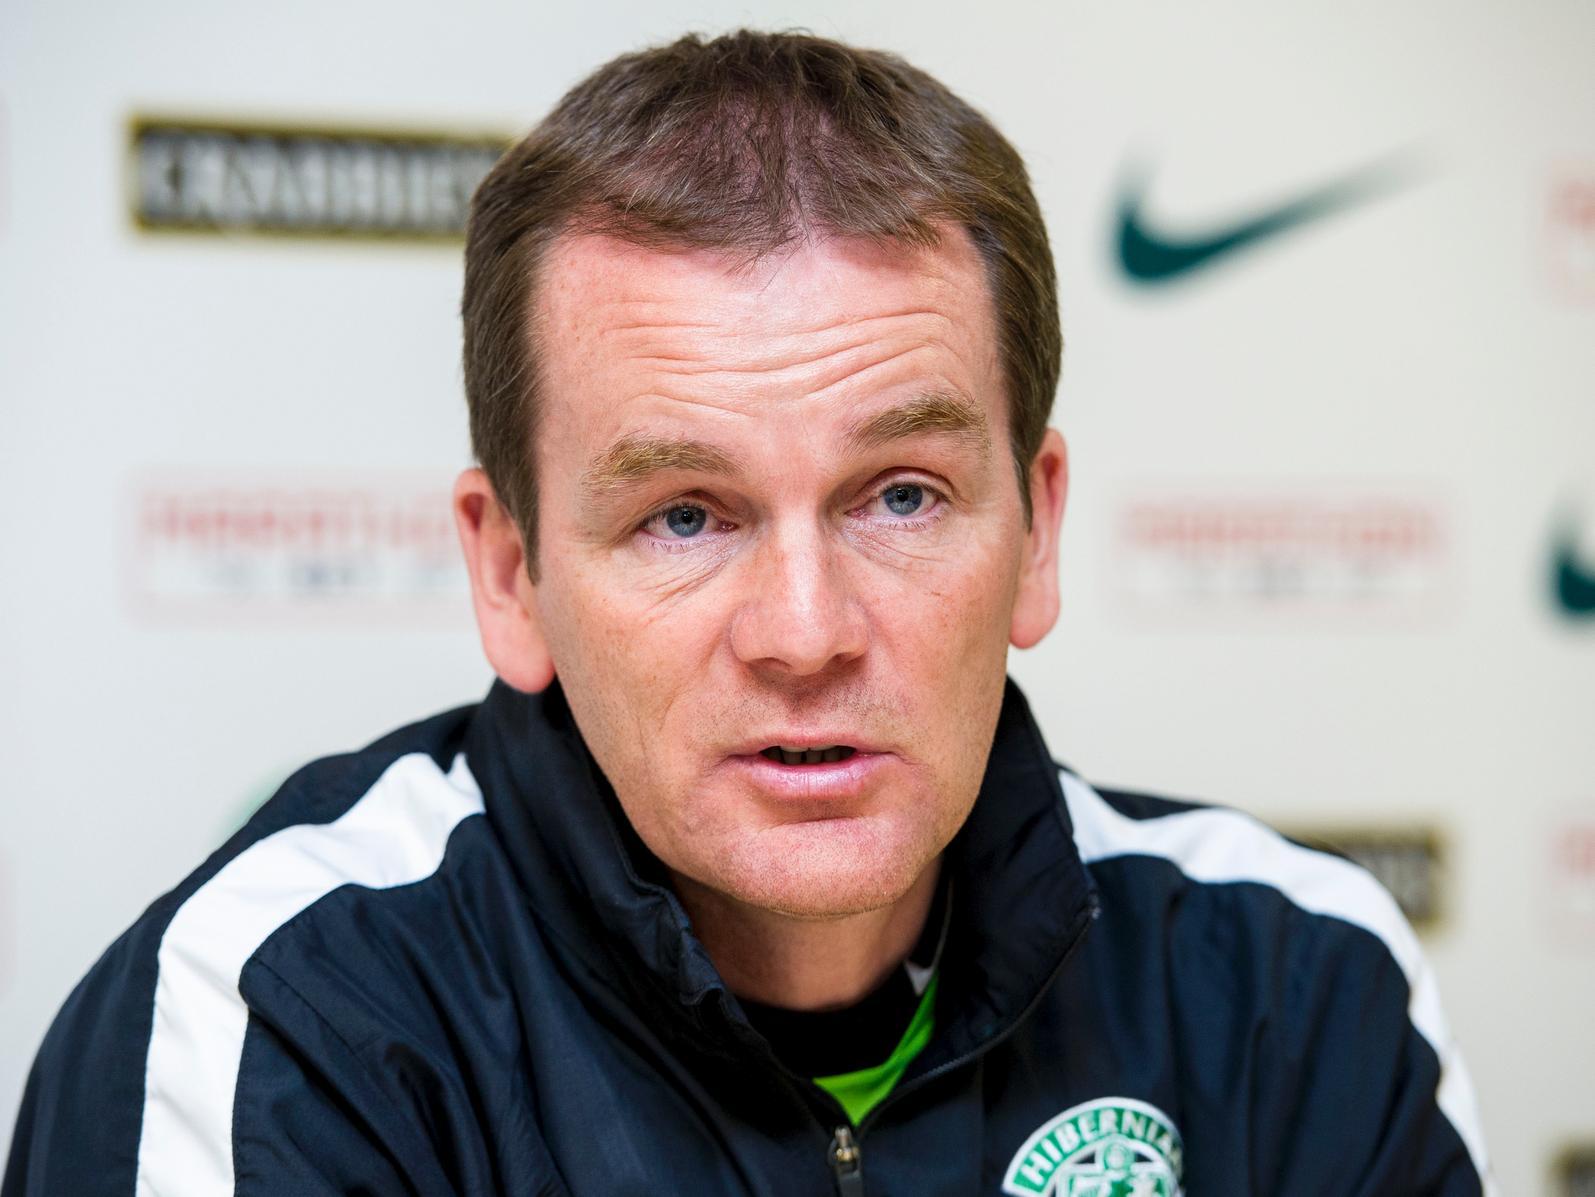 First-team coach under Alan Stubbs and has been tipped for a return before, but has never held an outright management / head coach role. Currently at Accrington but retains a lot of affection for Hibs